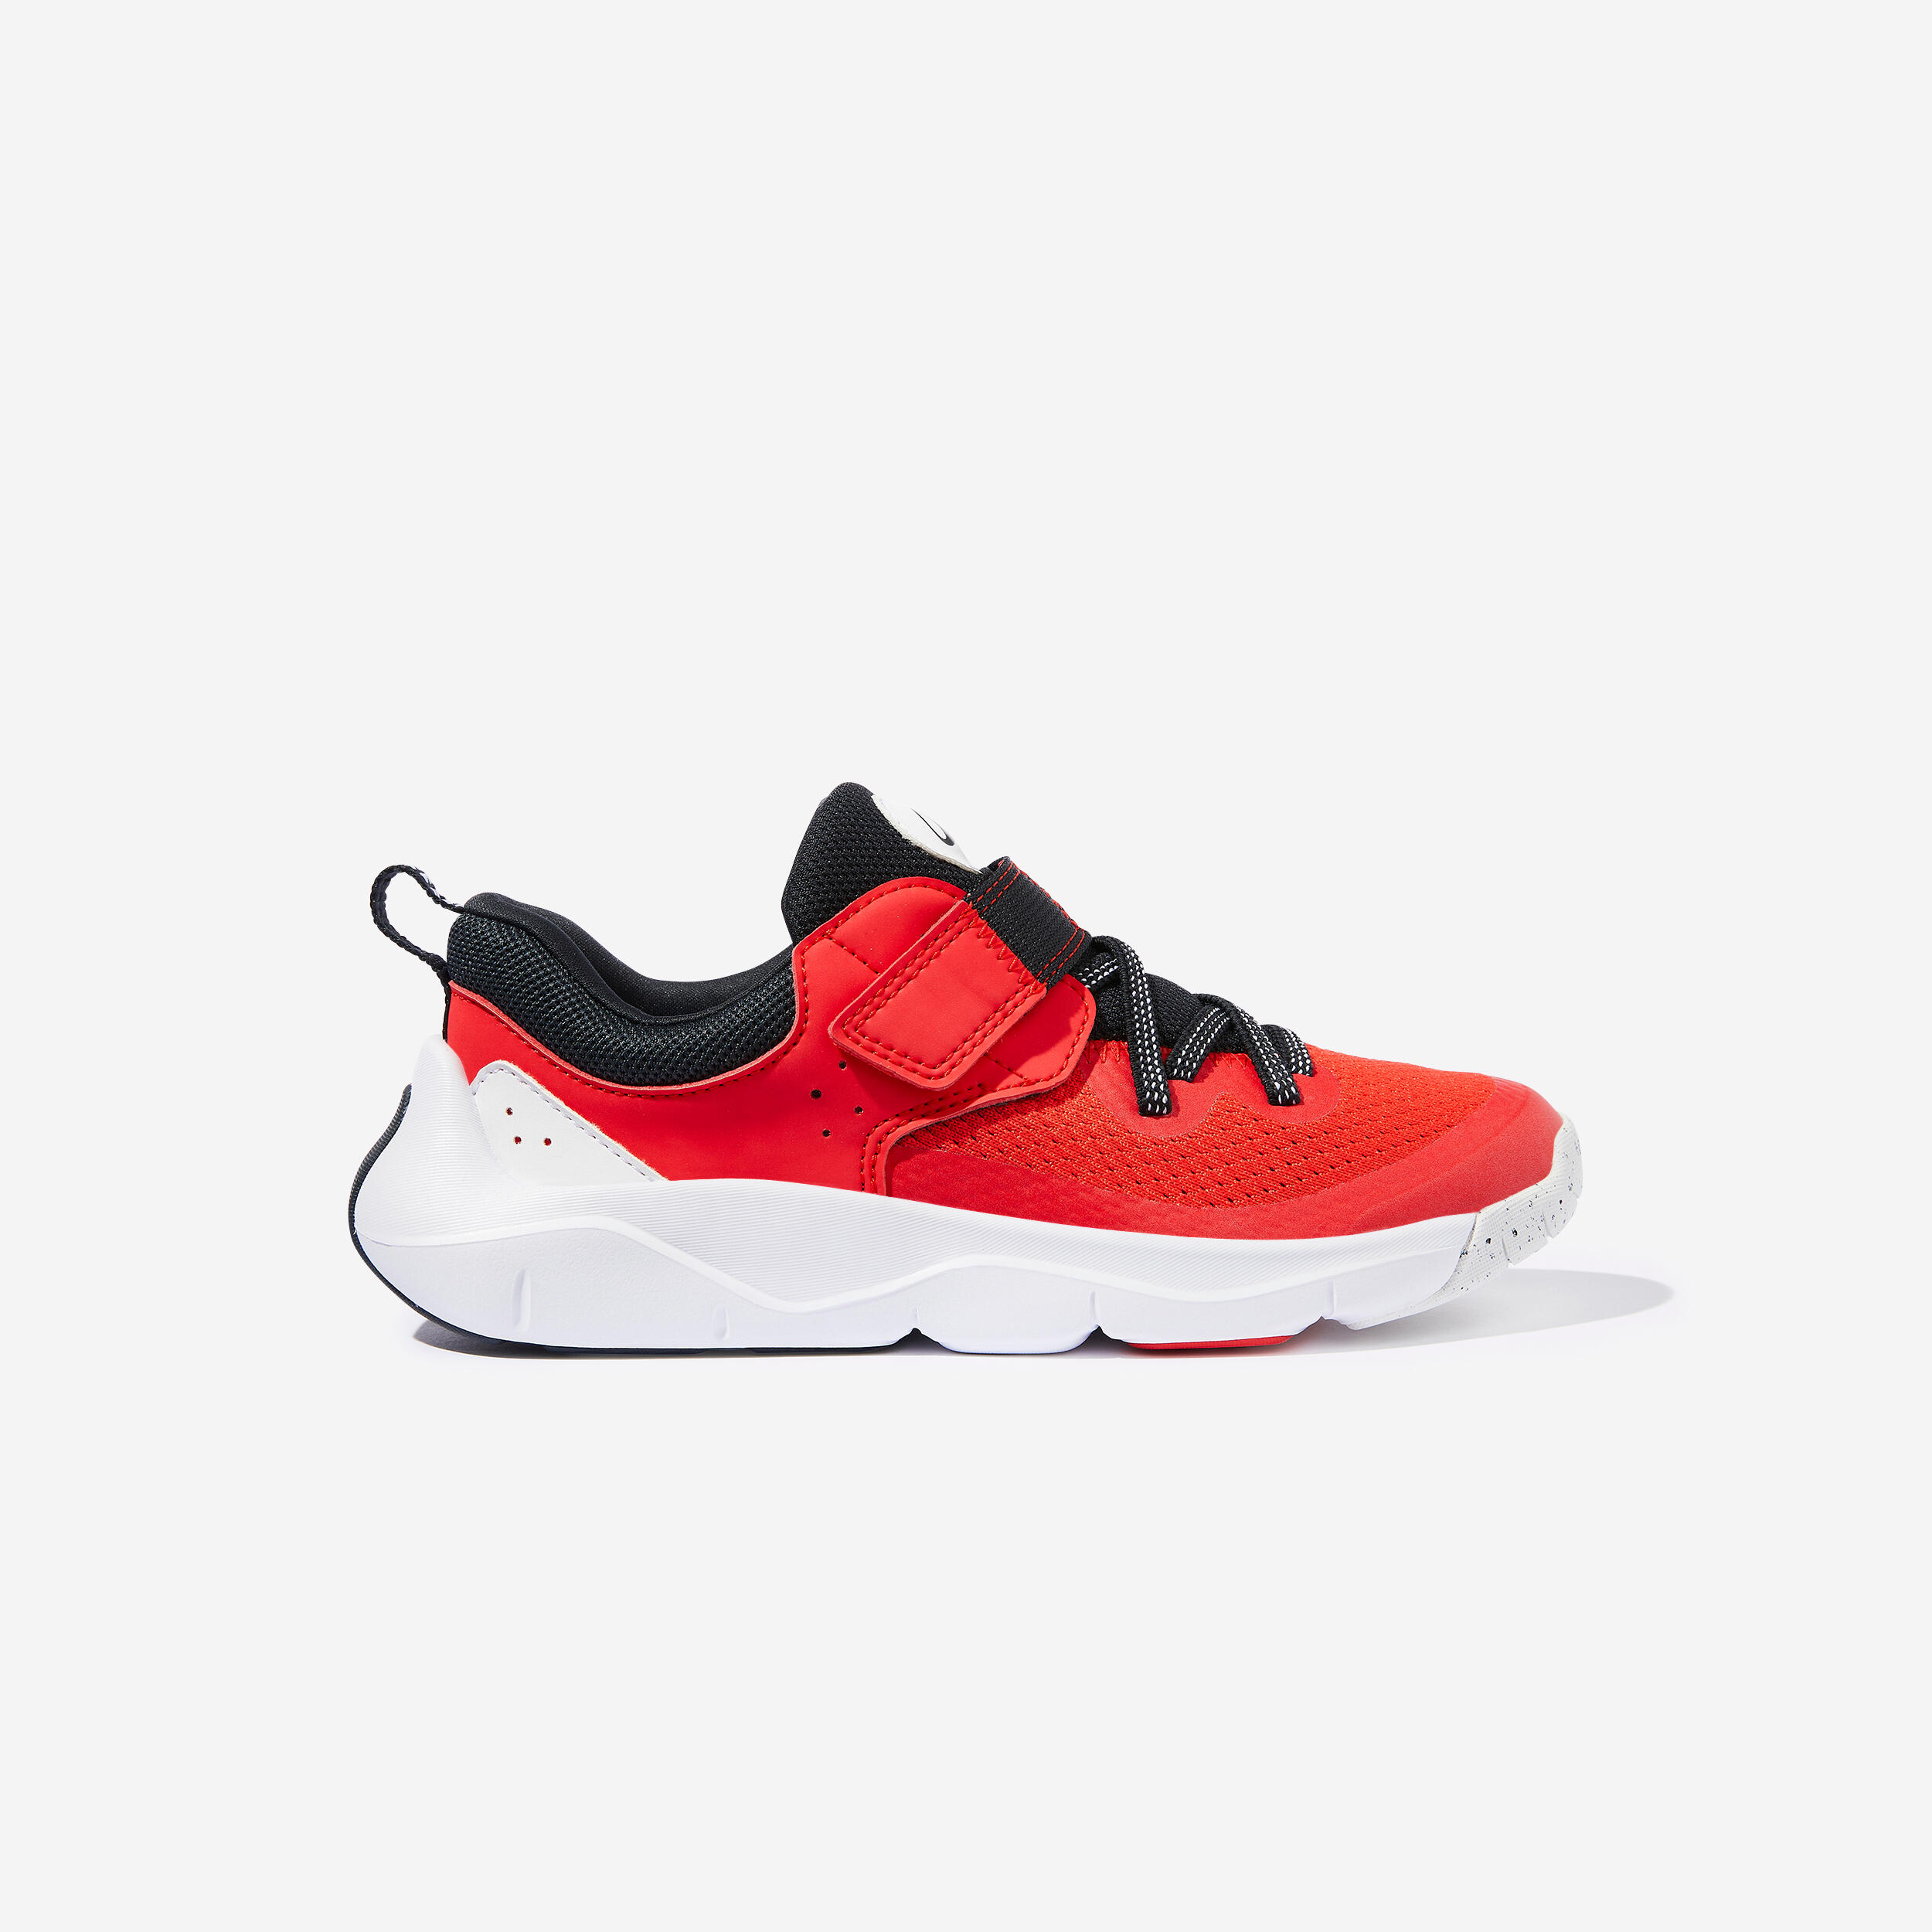 fluo electric red / graphite grey / ultra white